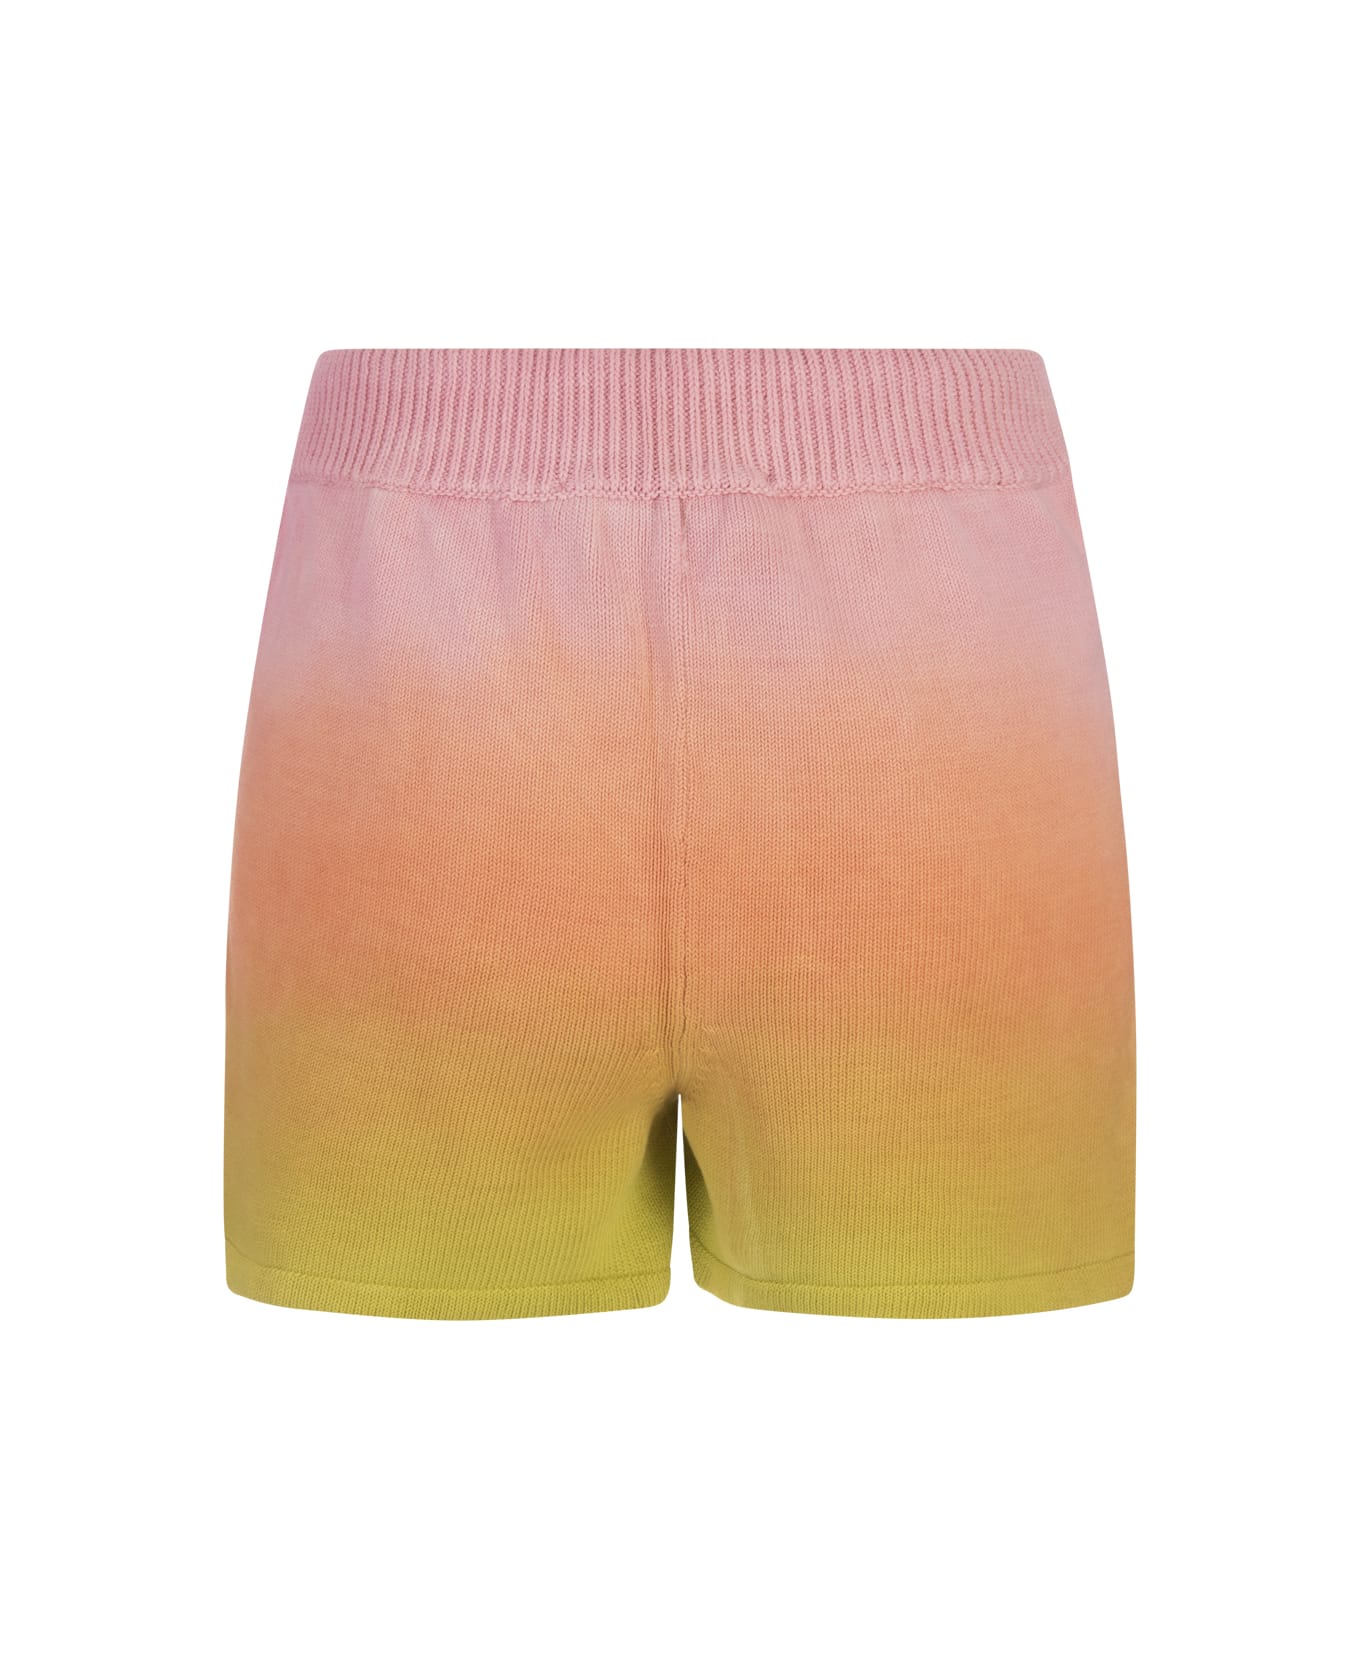 Barrow Multicoloured Knitted Shorts With Degradé Effect - Multicolour